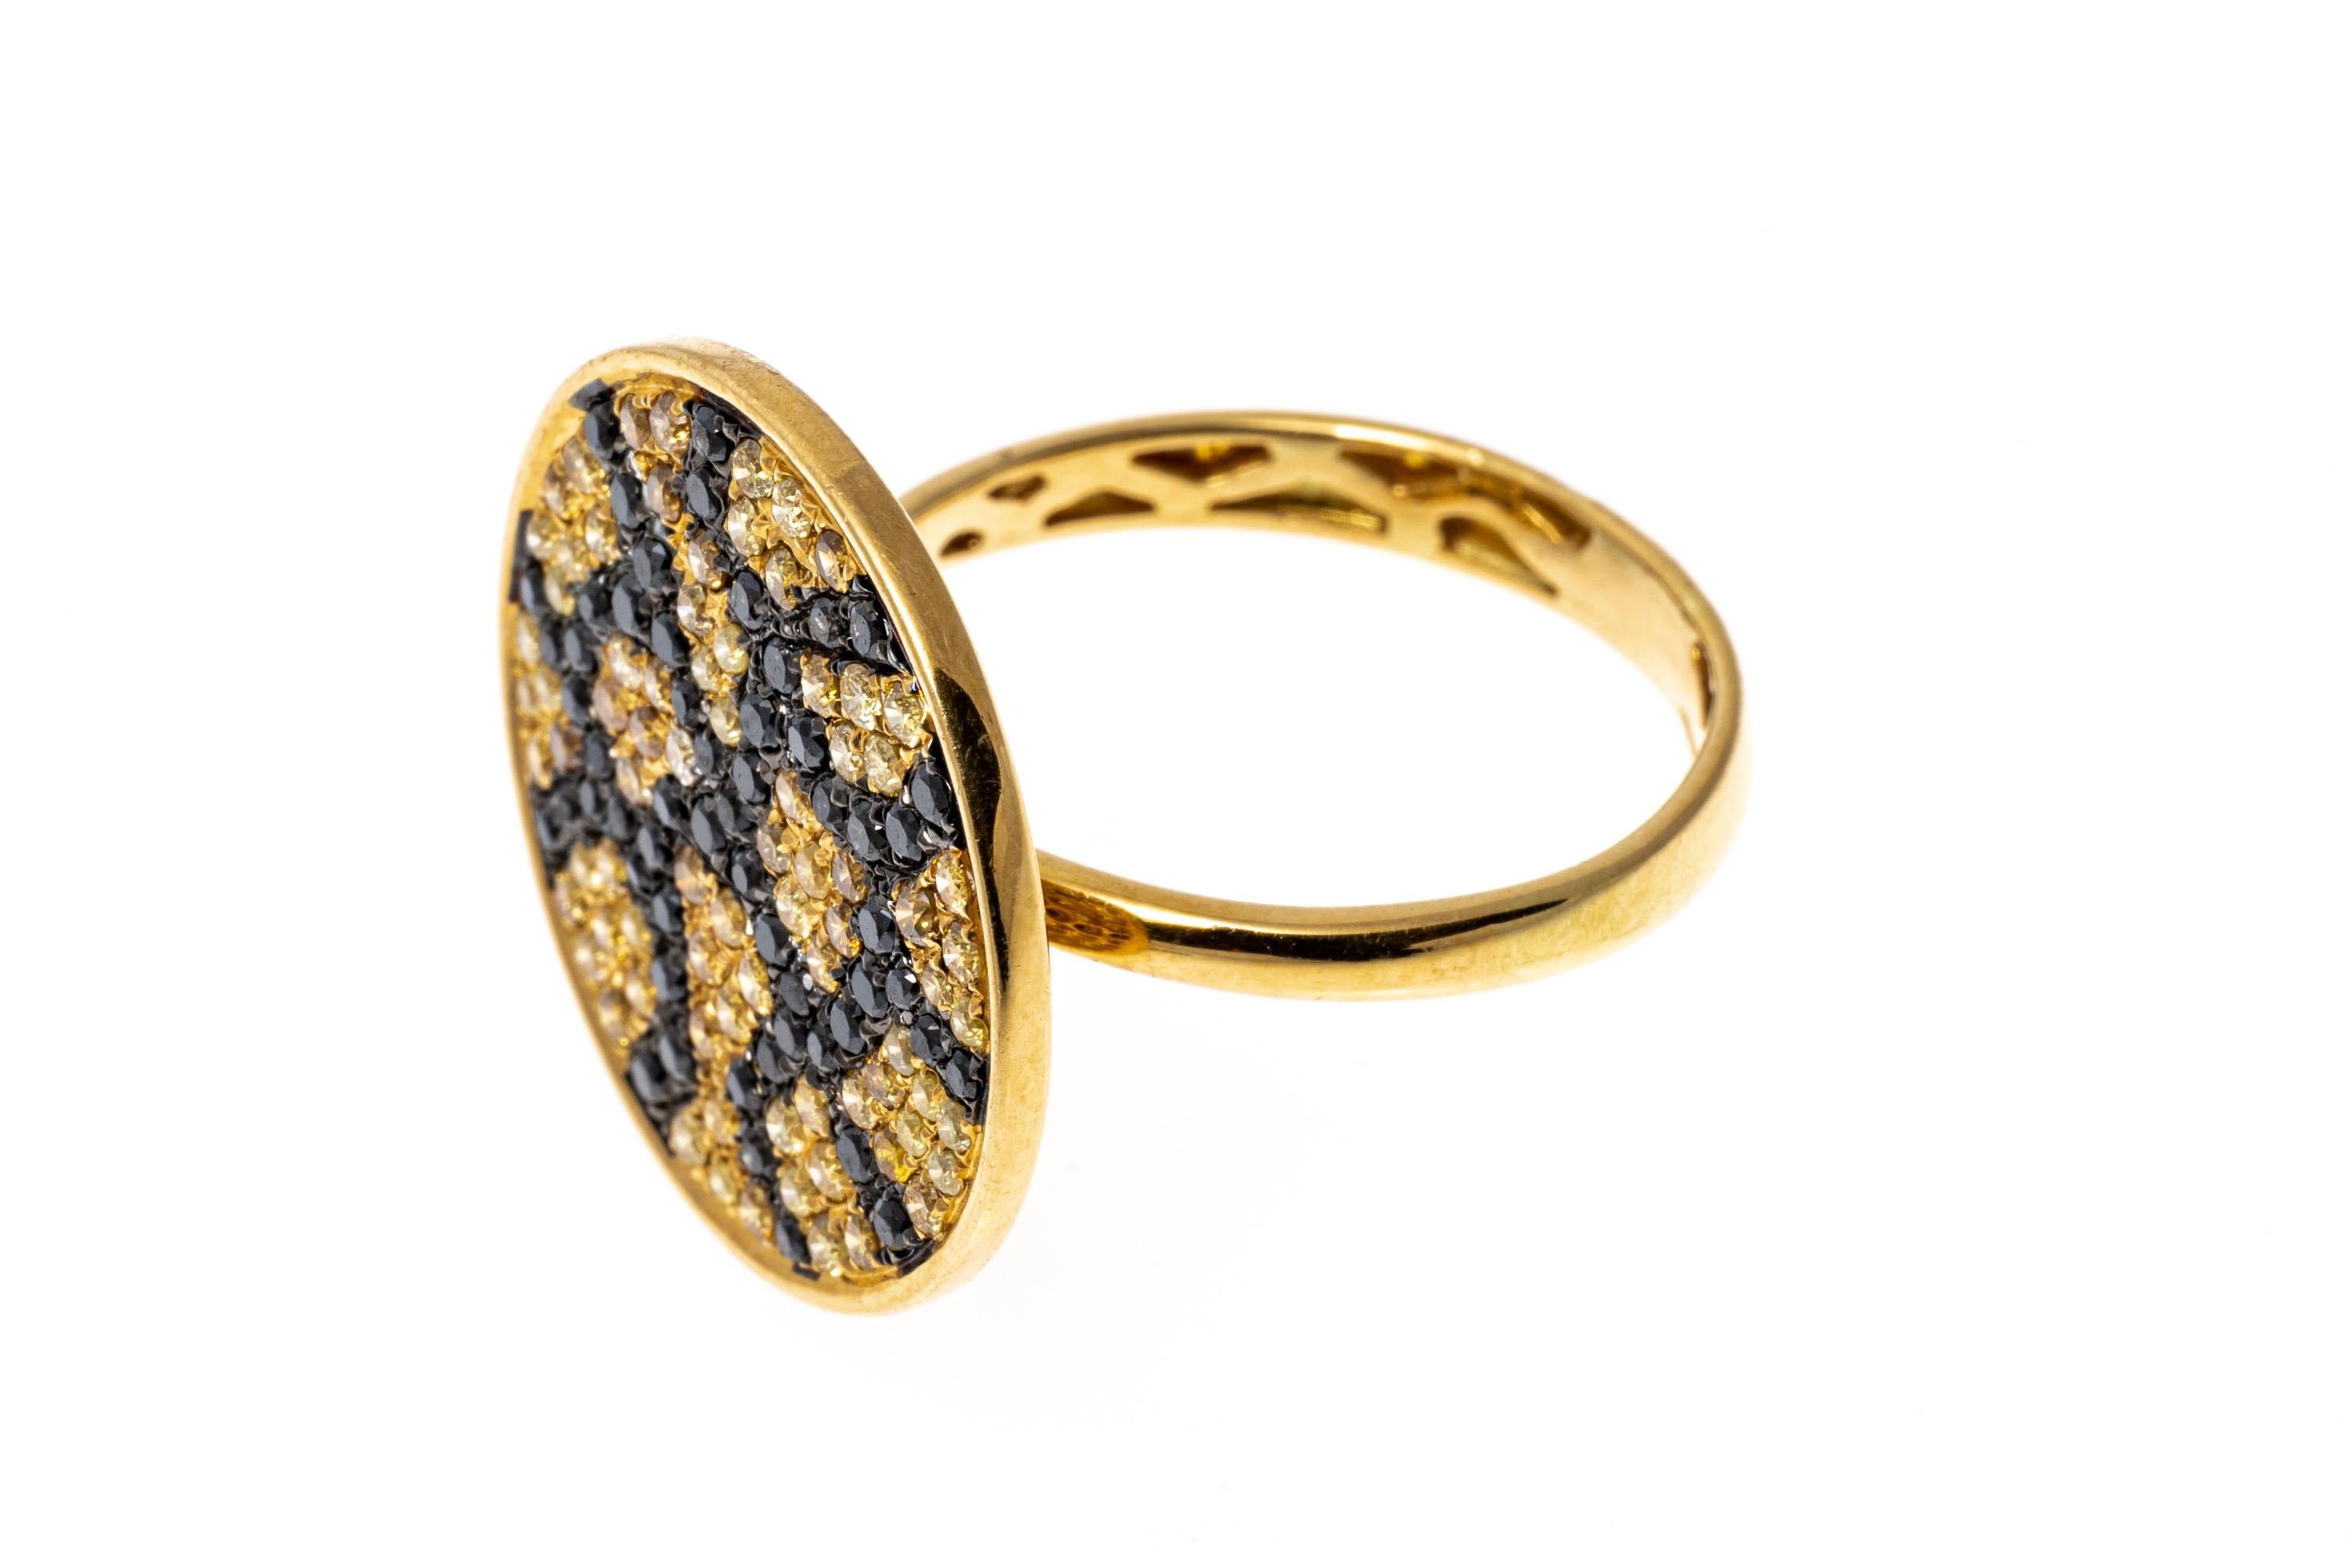 18k Yellow Gold Impactful Leopard Print Pave Diamond Ring, 1.13 TCW For Sale 3